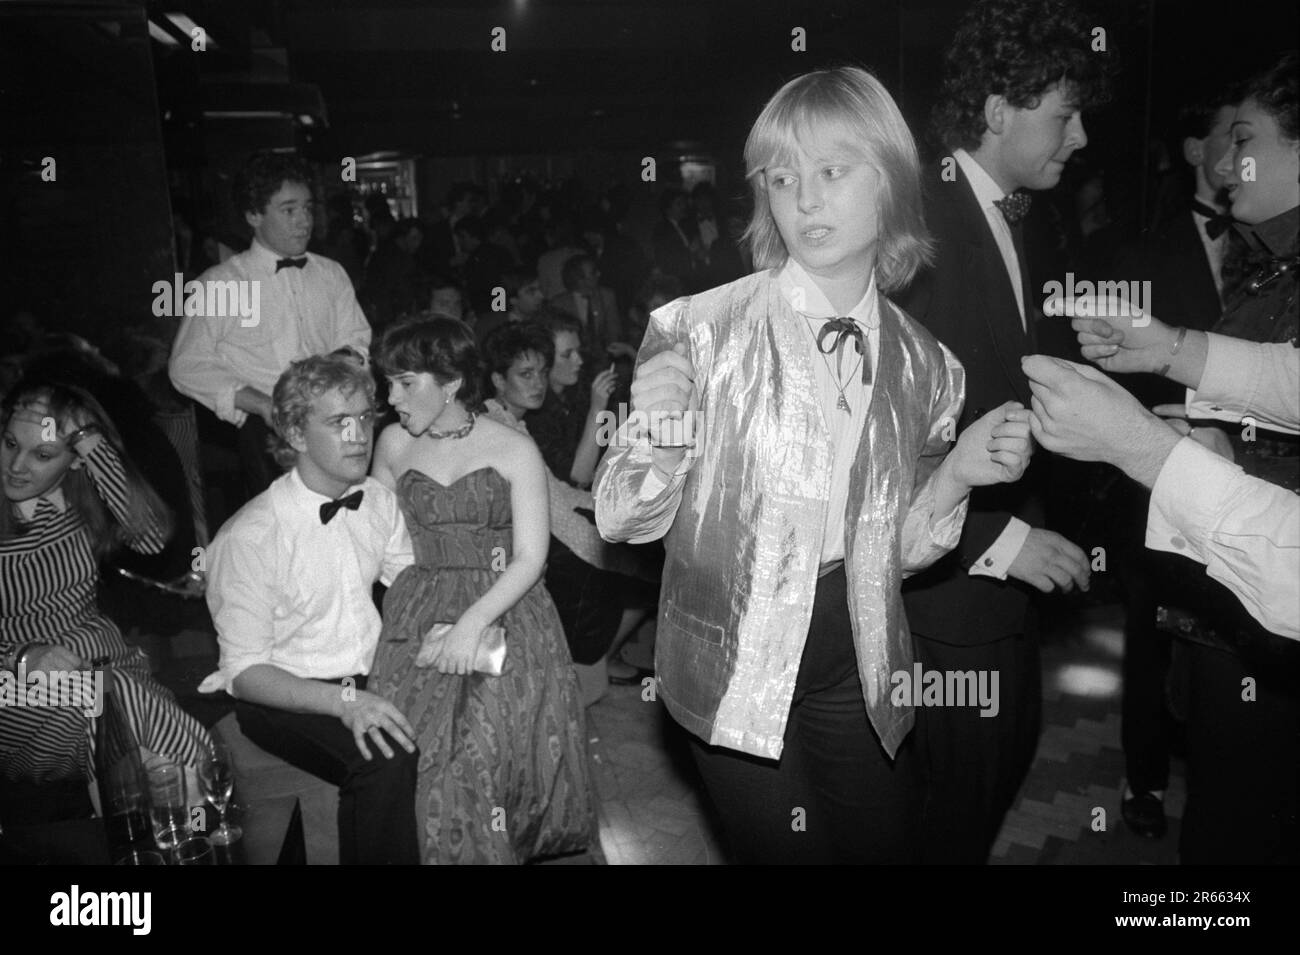 Sloane Rangers at Wedgies nightclub at 107 Kings Road, Chelsea. Young pretty and rich, disco dancing at Wedgies in the Kings Road. Chelsea, London, England 1982.1980s UK HOMER SYKES Stock Photo